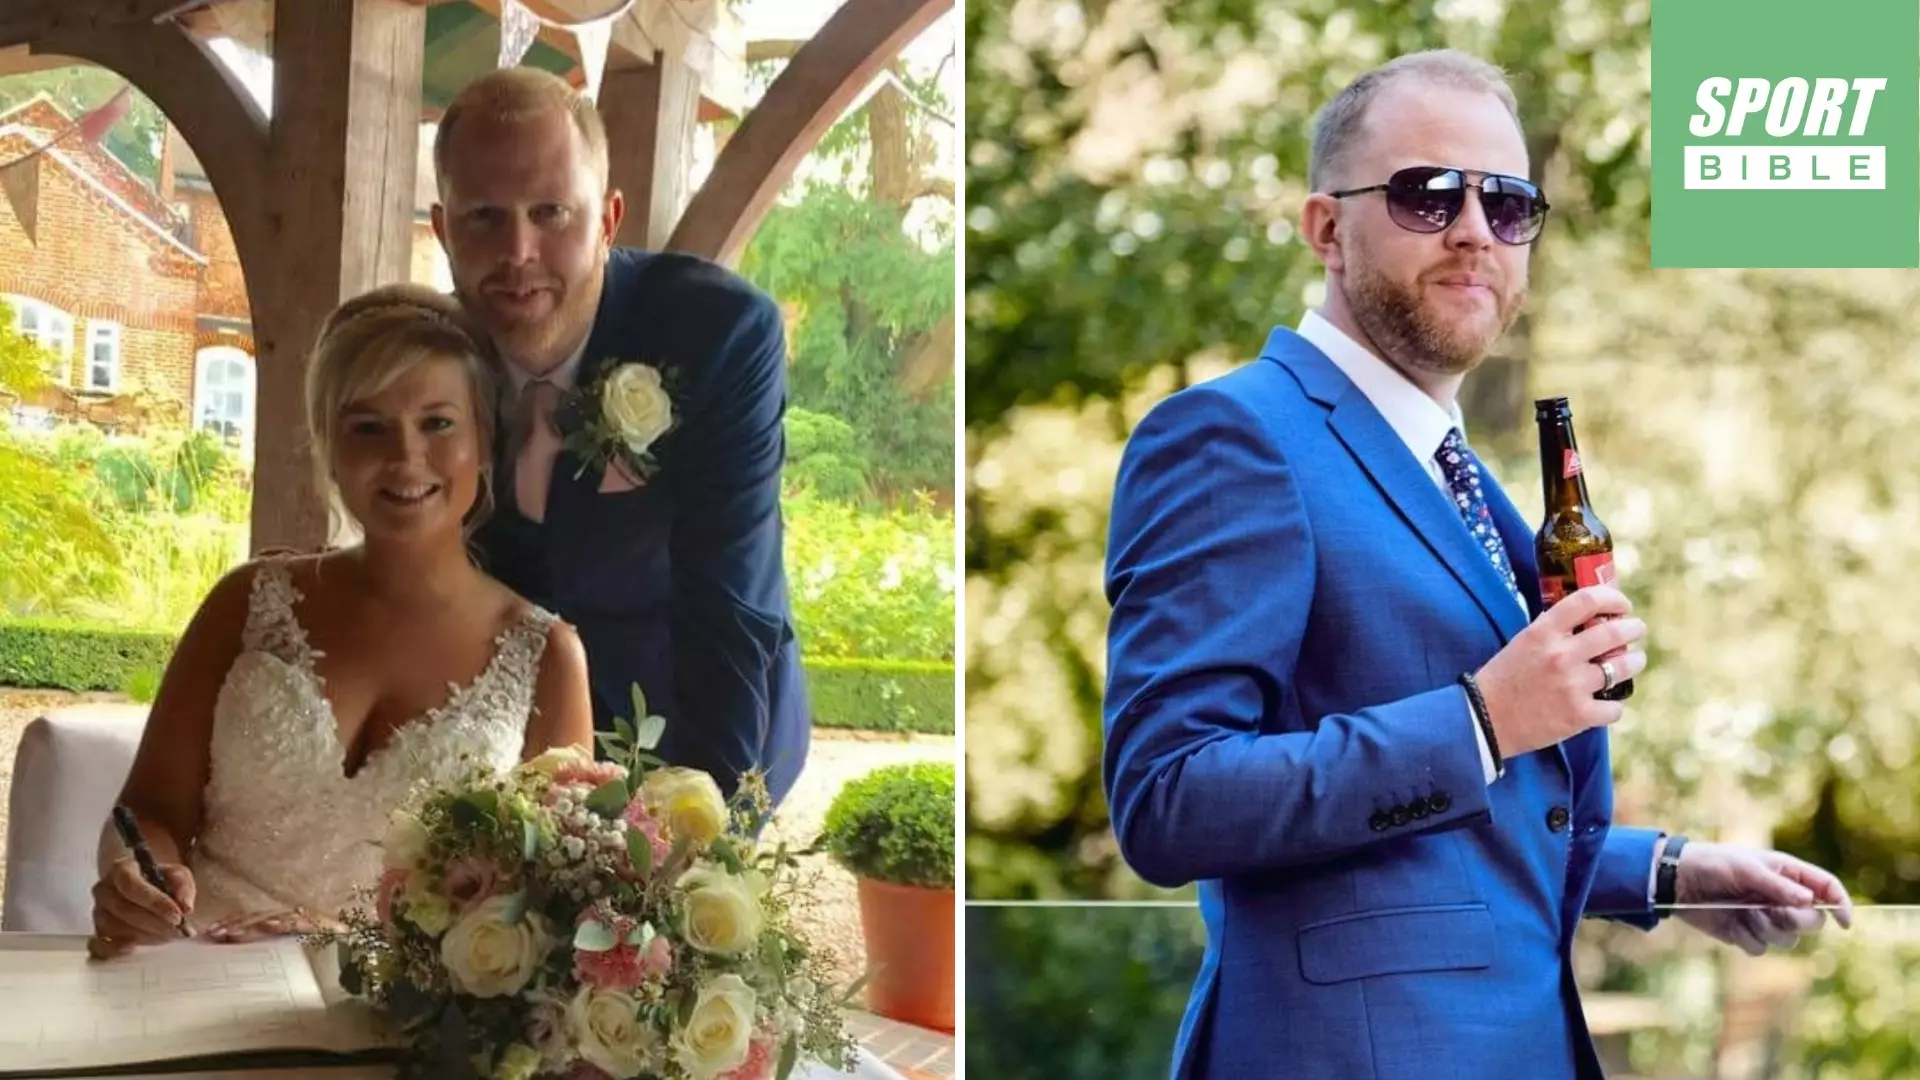 New parents Tim Aston, 37, and Beth Aston, 28, pictured together on their wedding day in 2018.